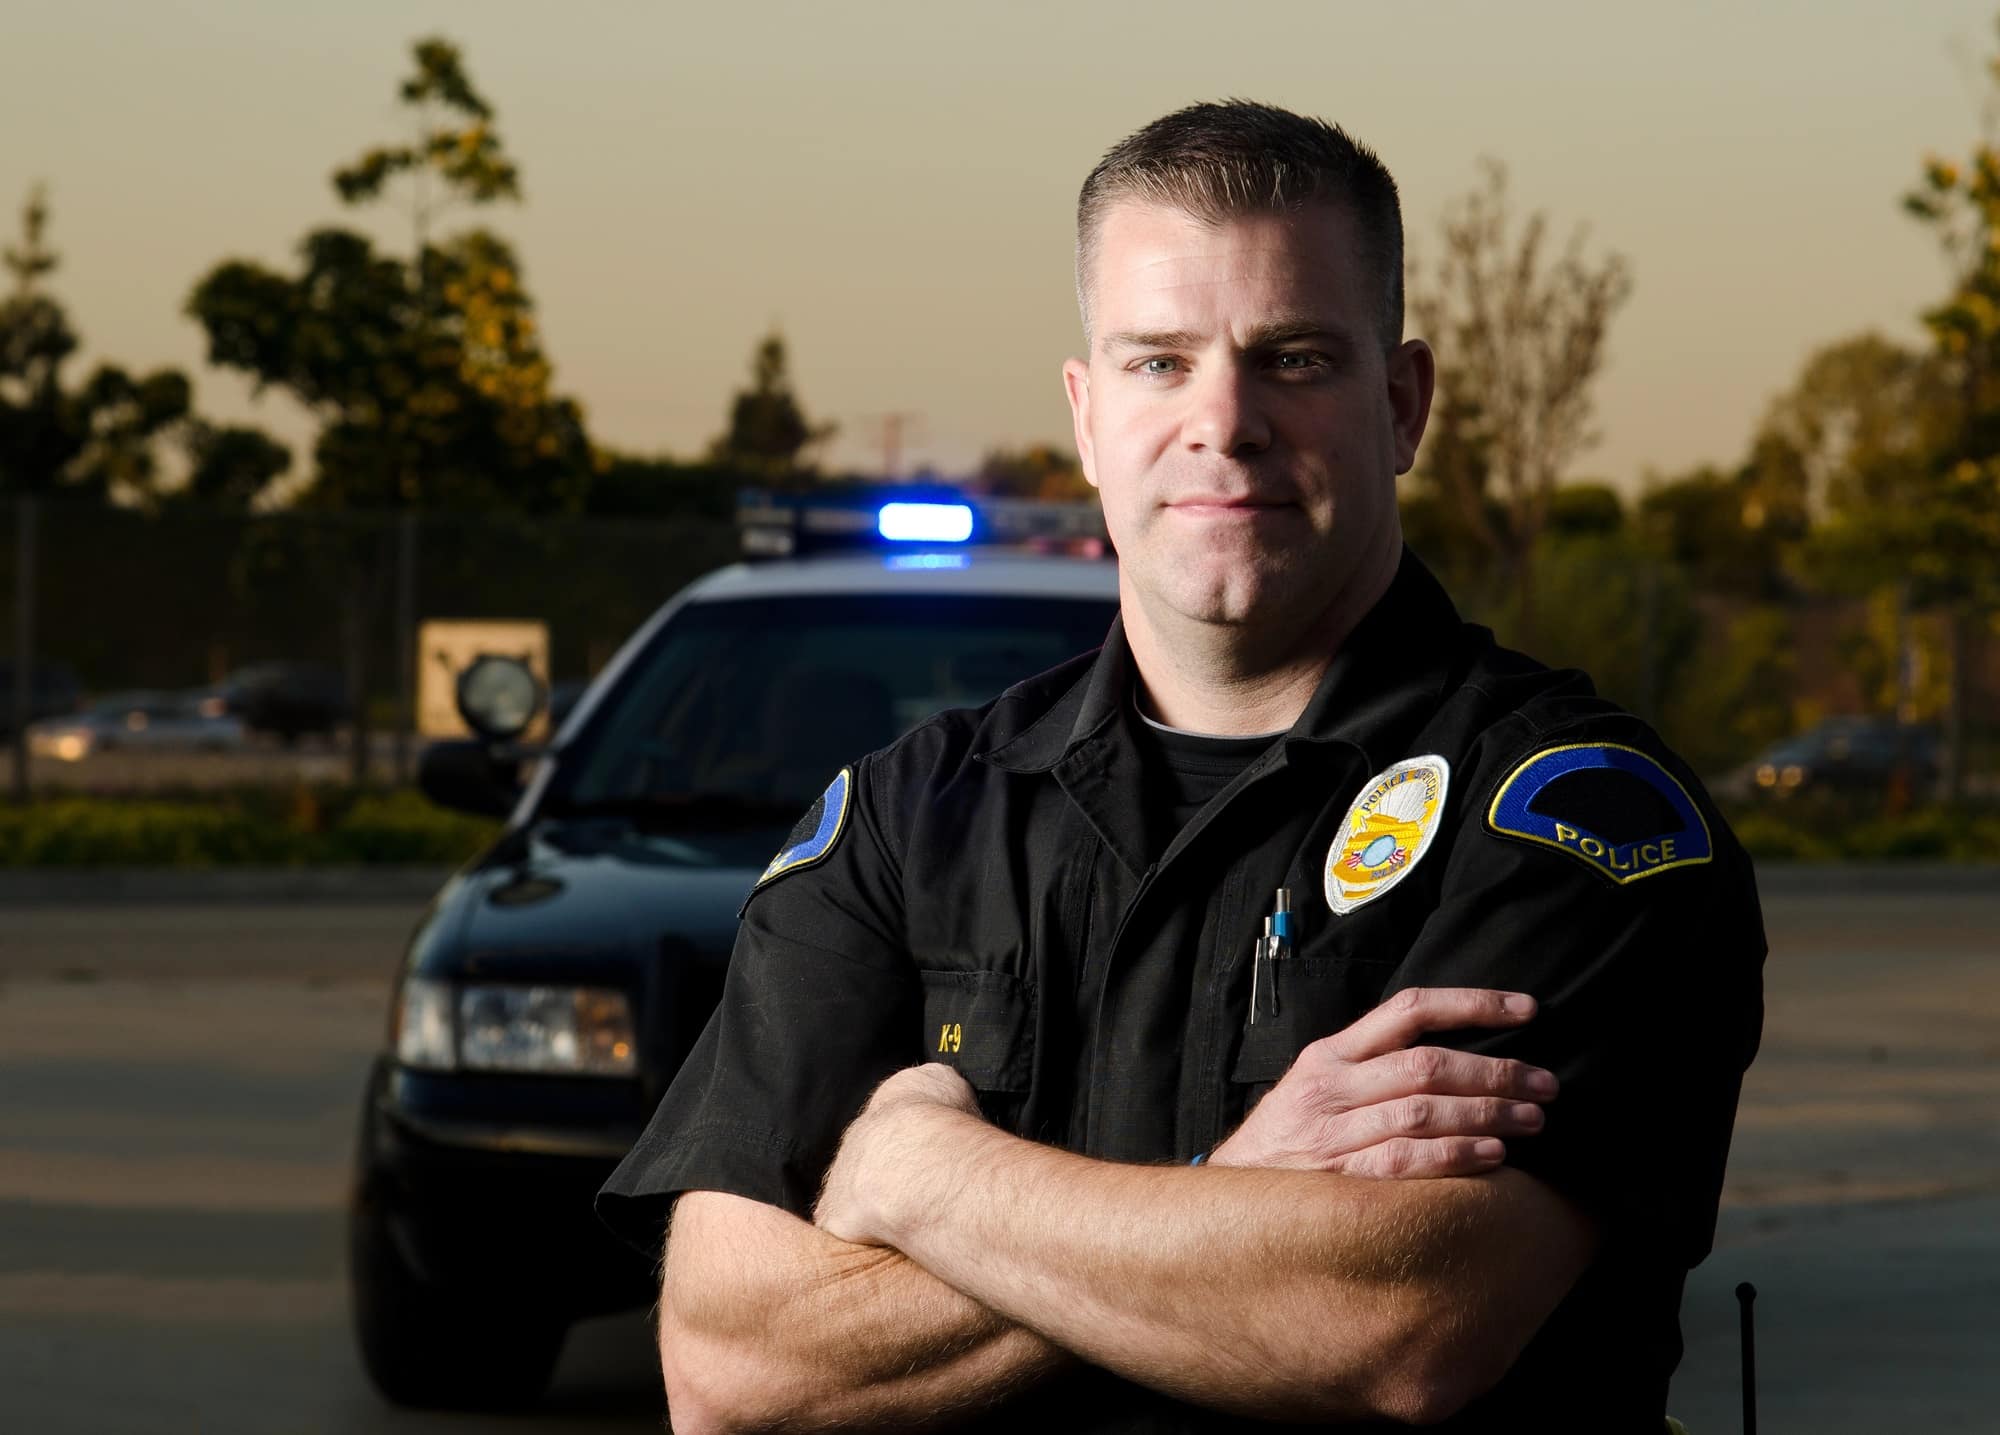 Police officer leads nationwide autism awareness for better crisis response